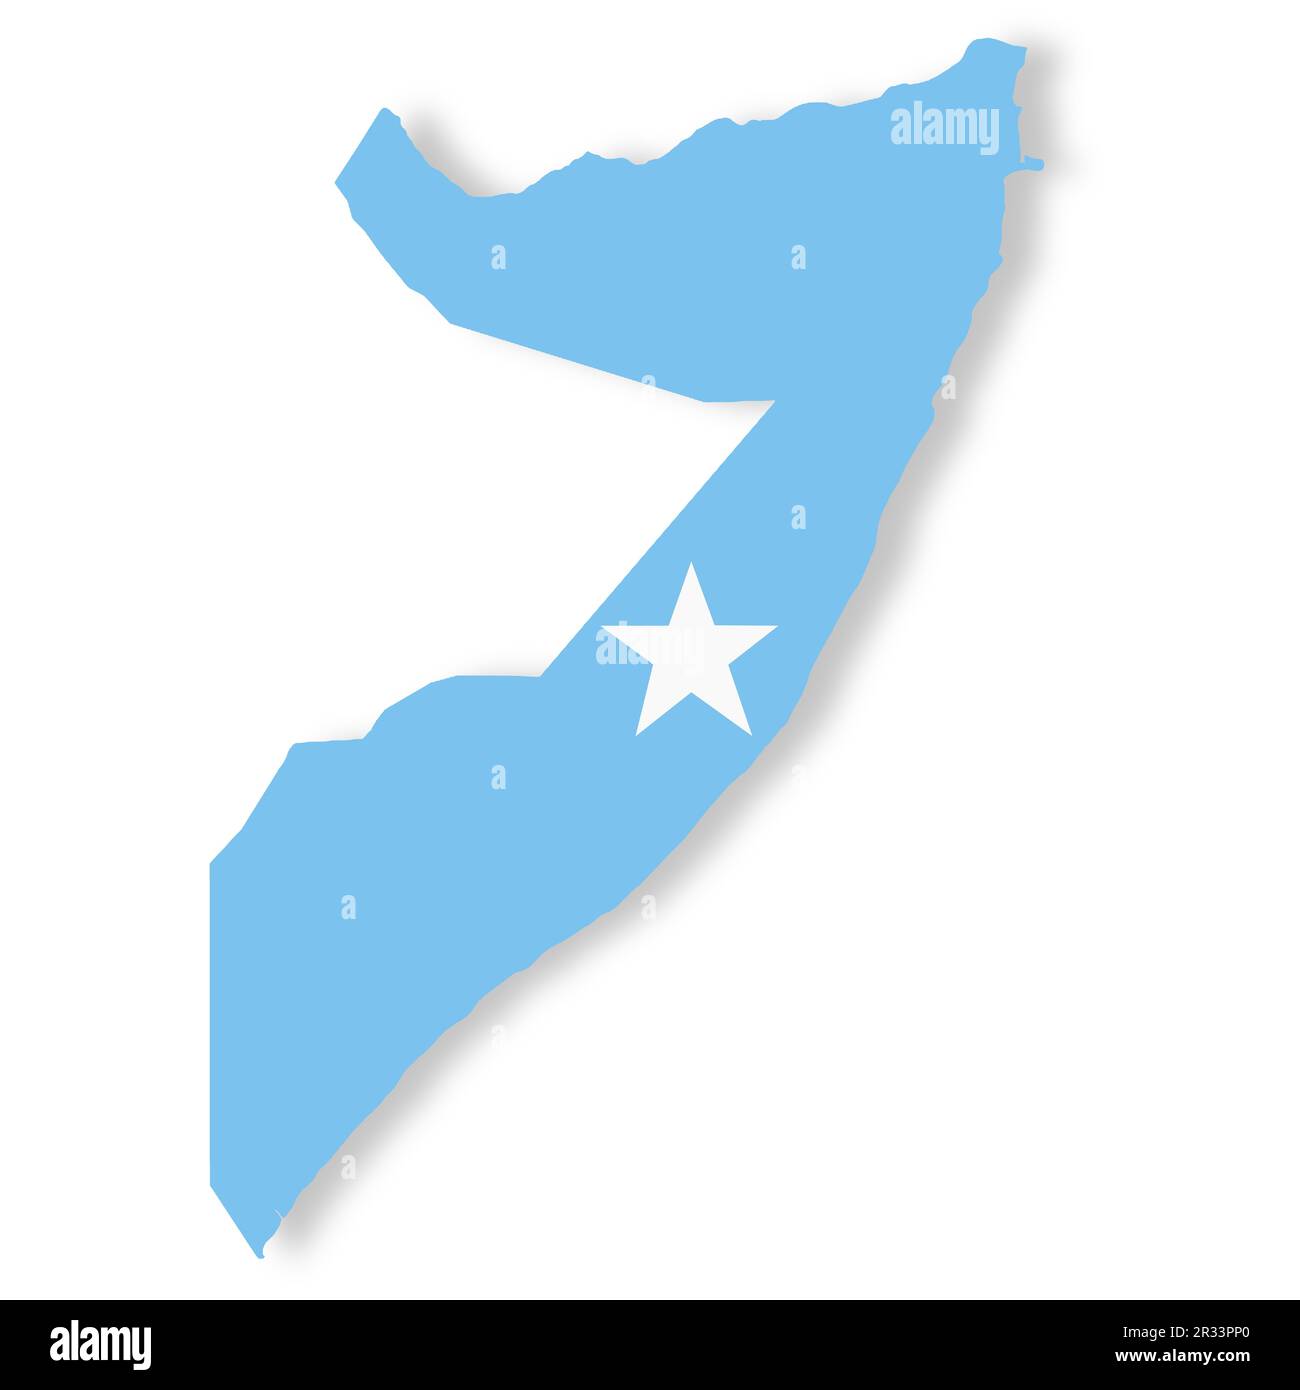 Somalia flag map with clipping path 3d illustration Stock Photo